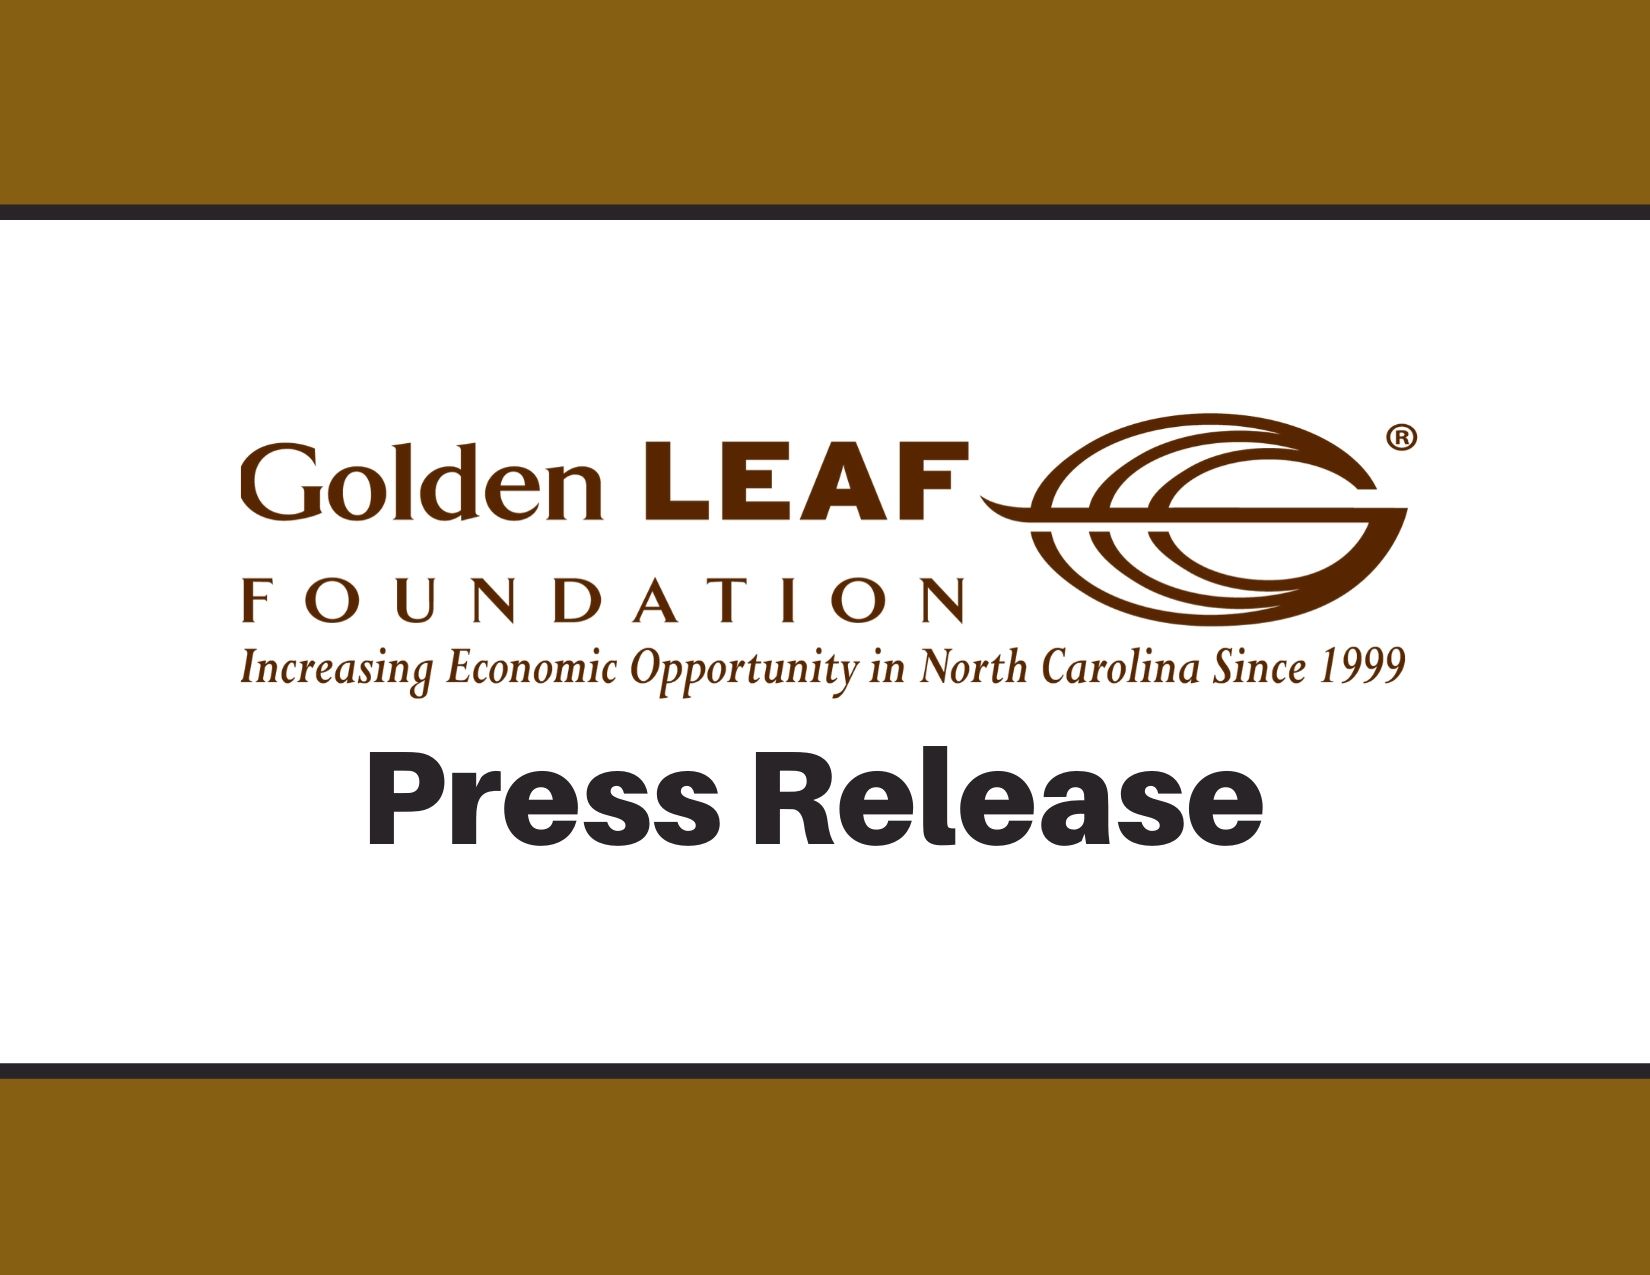 Golden LEAF Board announces 47 projects totaling $16.1 M in funding, names Johnathan Rhyne Board Treasurer